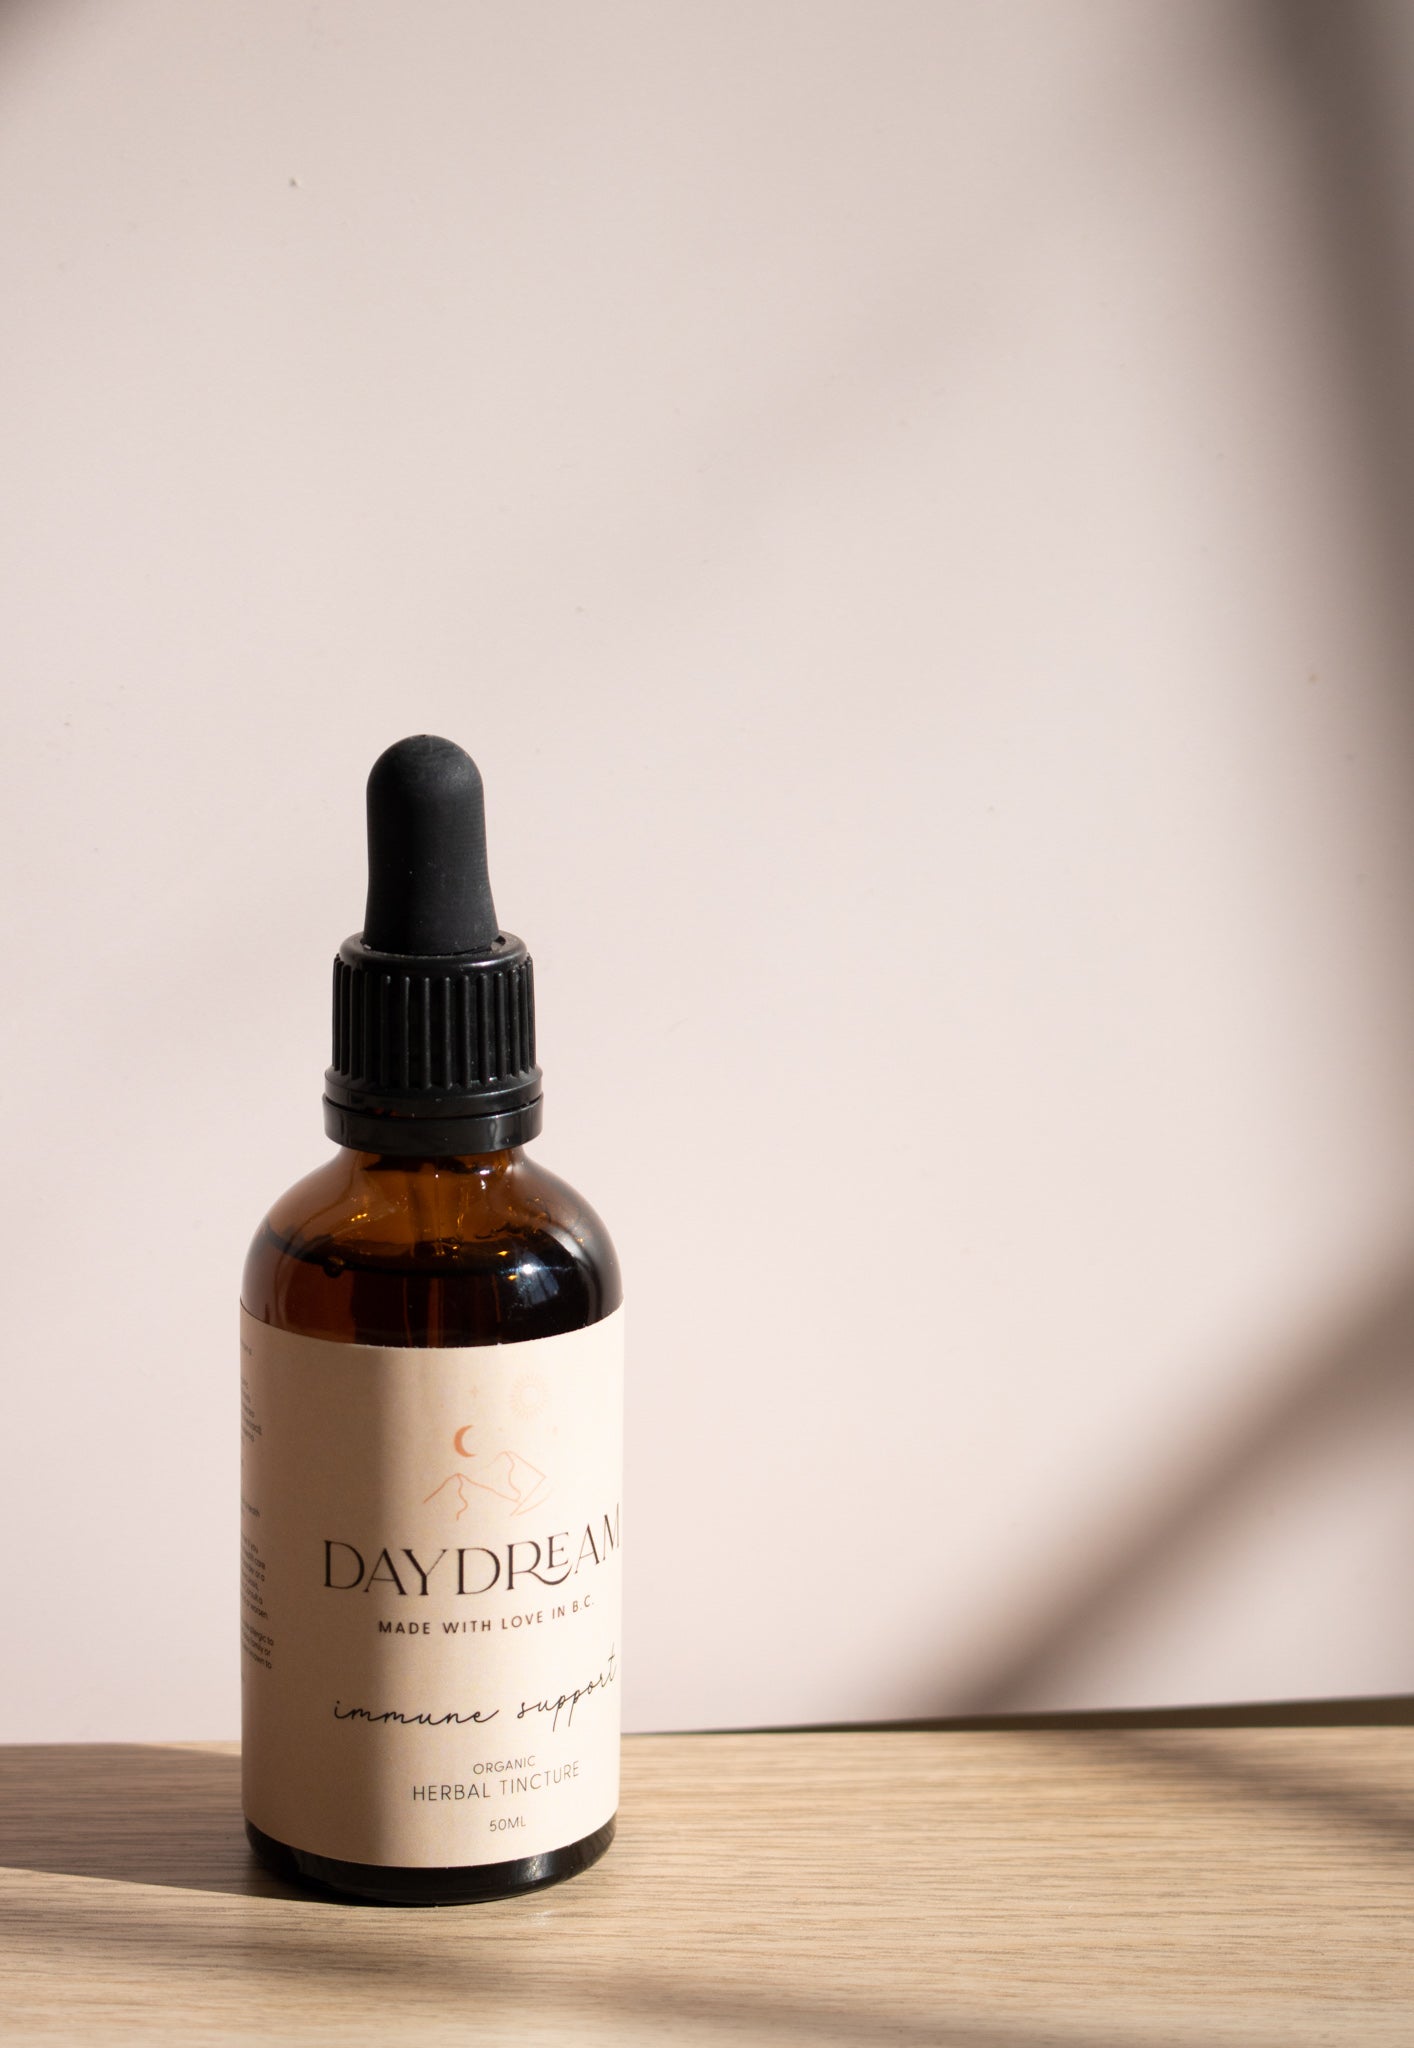 Our Immune Support Herbal Tincture is a blend of Echinacea, Astragalus & Reishi that is potent and has the ability to counter viral and bacterial infections making it a go-to formula for preventing and treating infections such as coughs, colds and flus. 